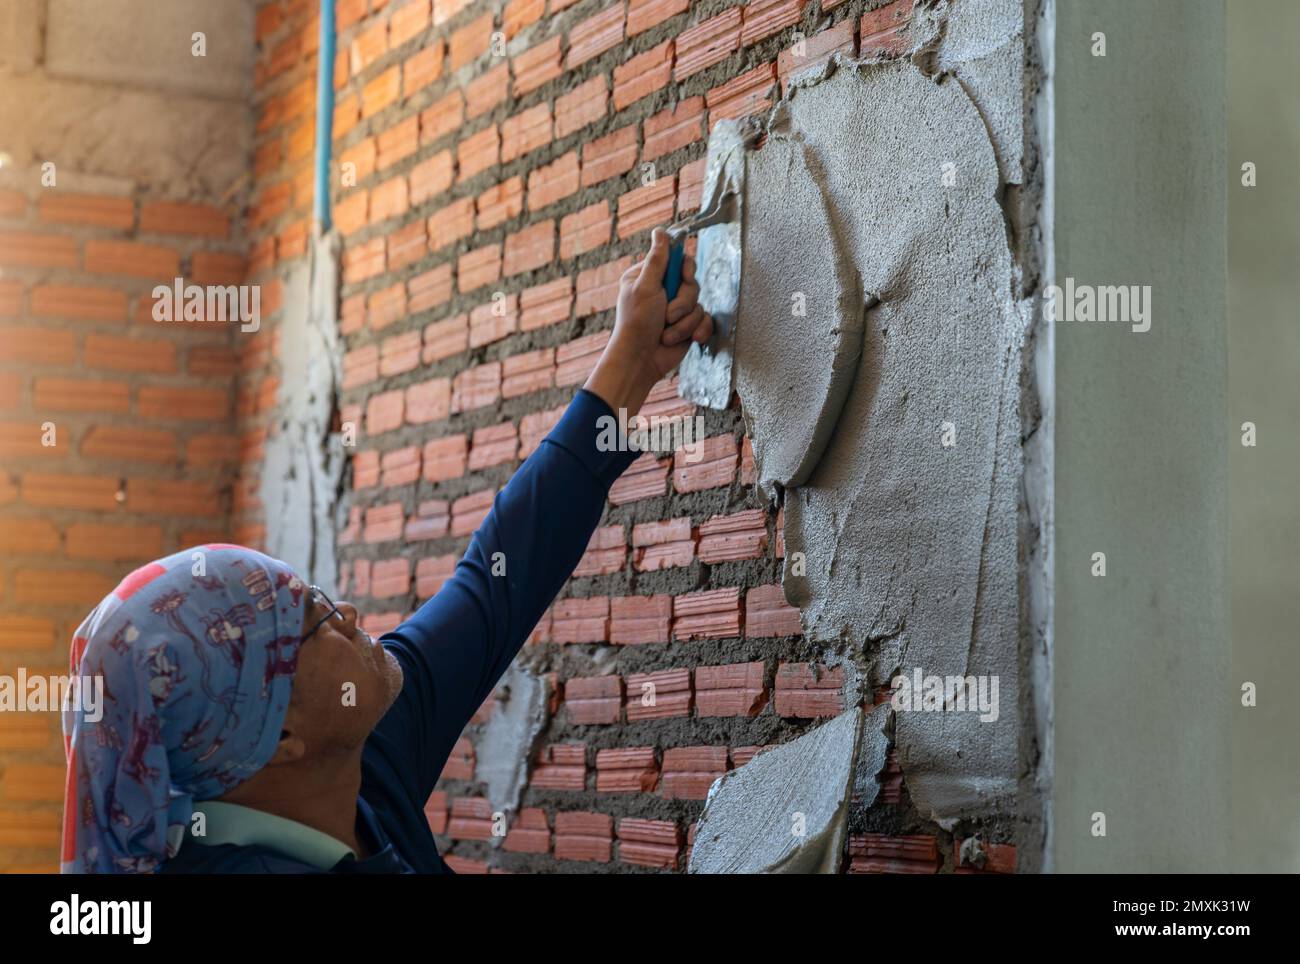 Workers plastering brick walls in construction site. Stock Photo